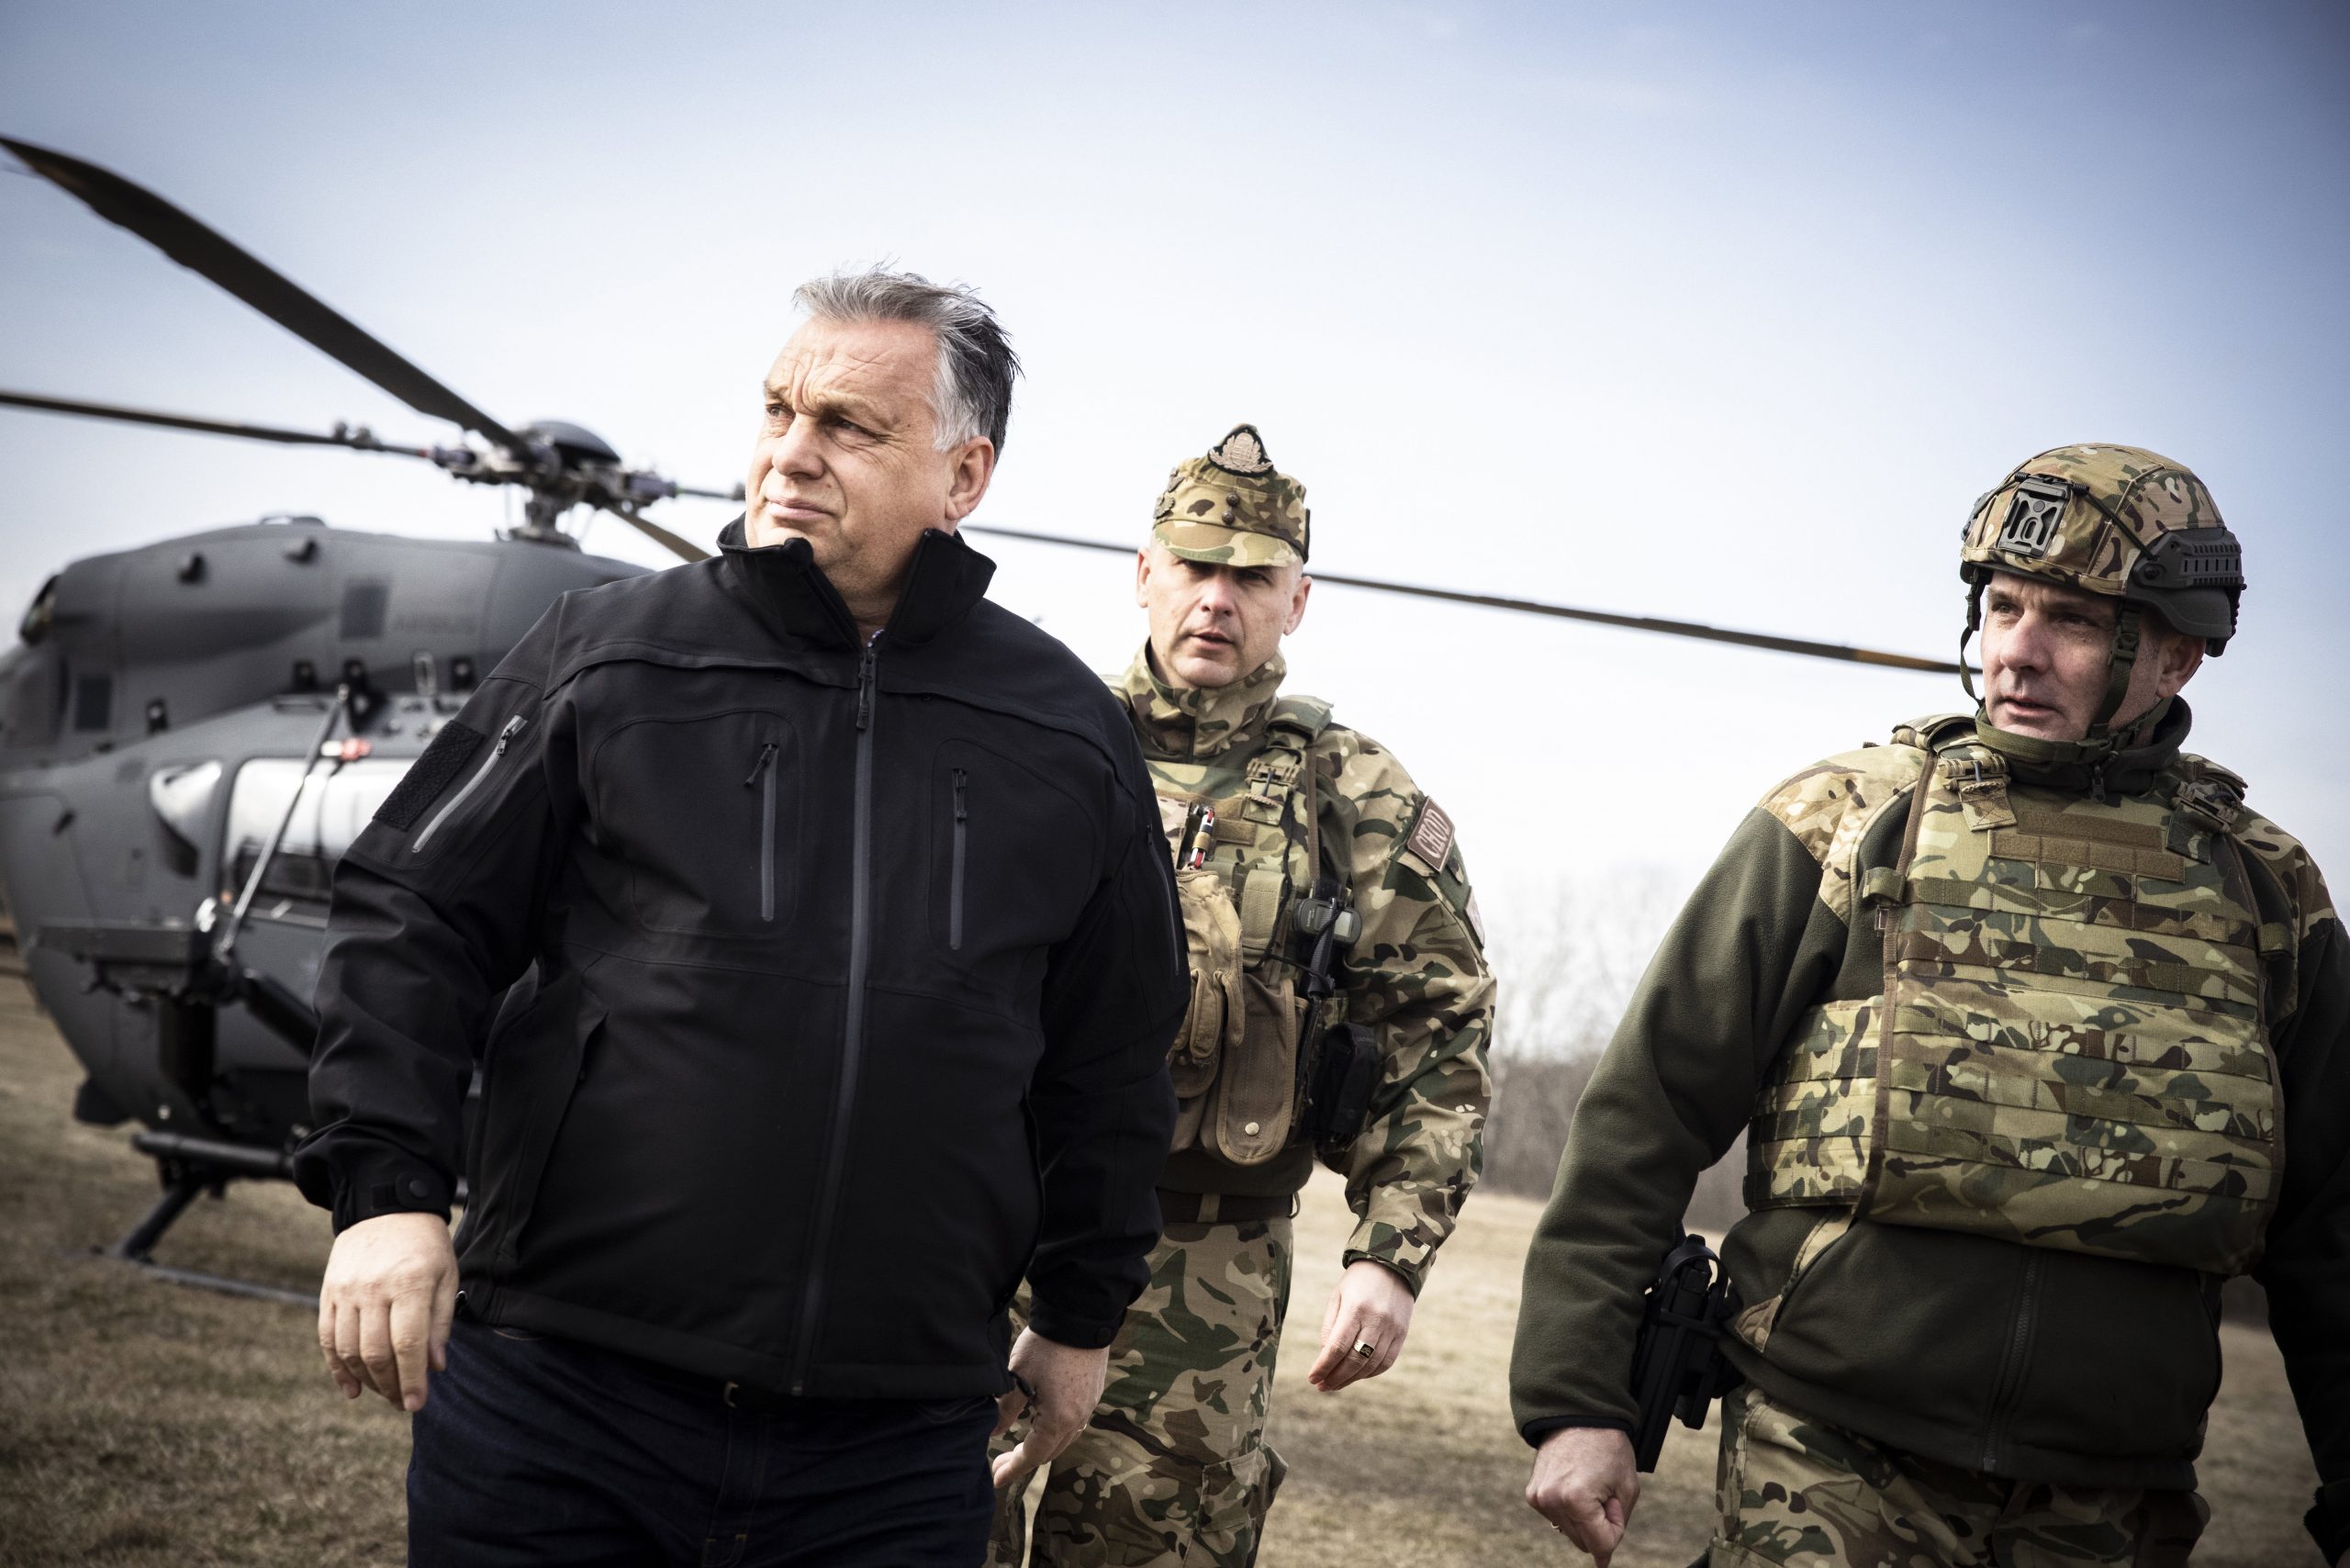 PM Orbán: Hungary Will Not Allow Lethal Aid Across Hungarian-Ukrainian Border